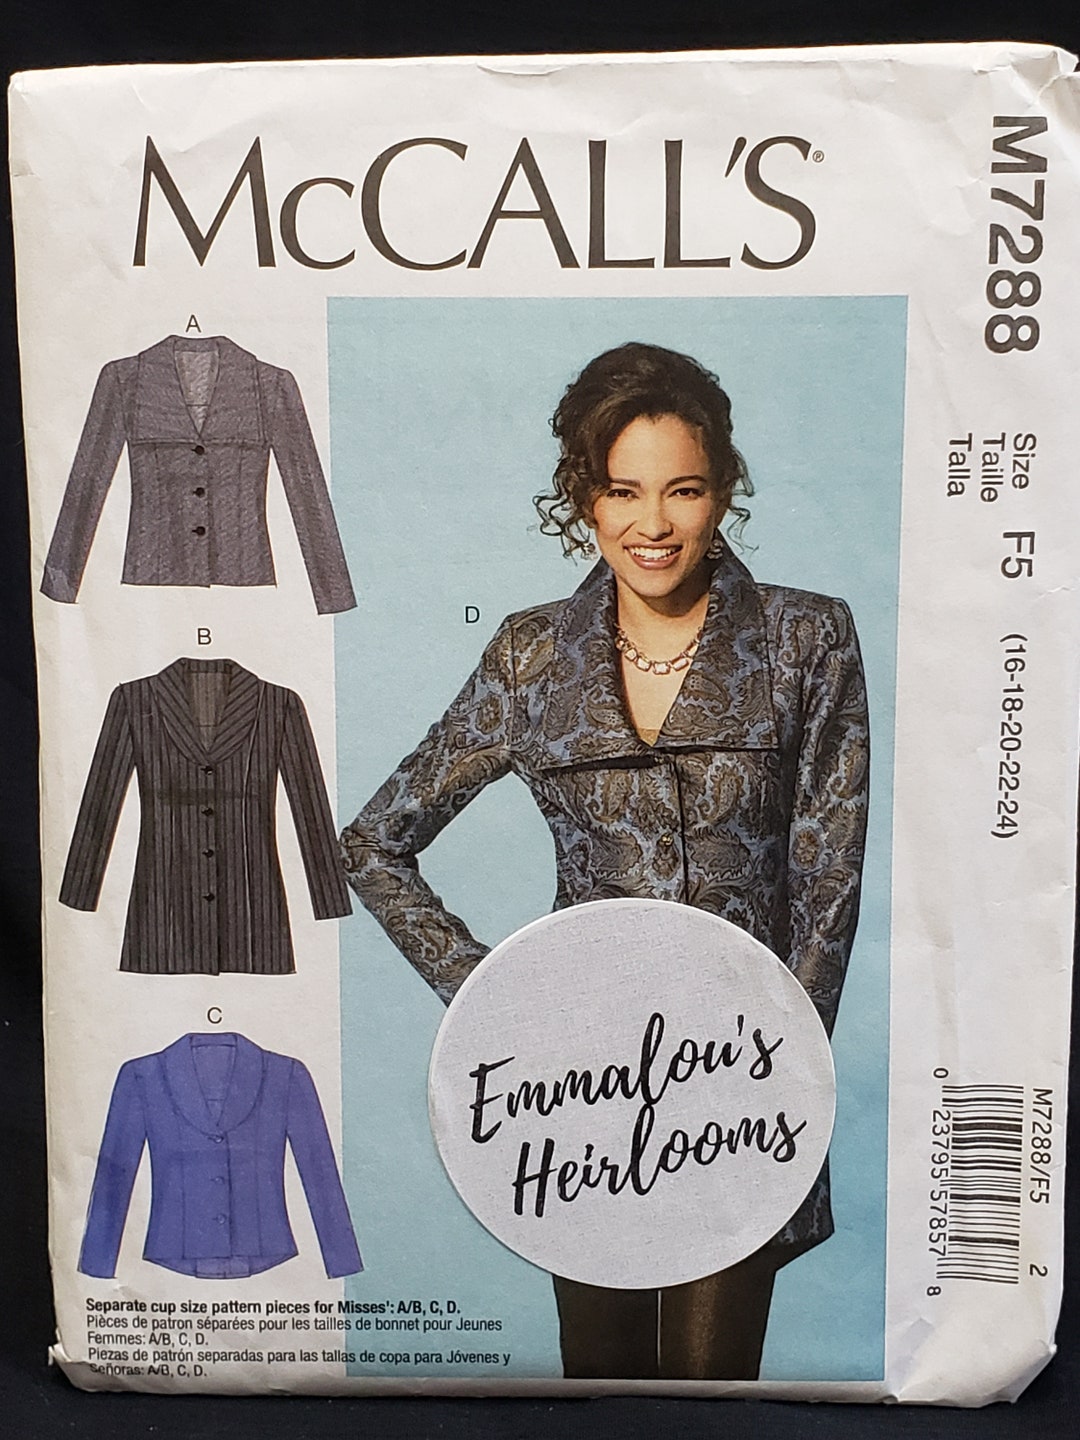 Mccalls 7288 Sewing Pattern, Fitted Unlined Jackets With Collar and ...